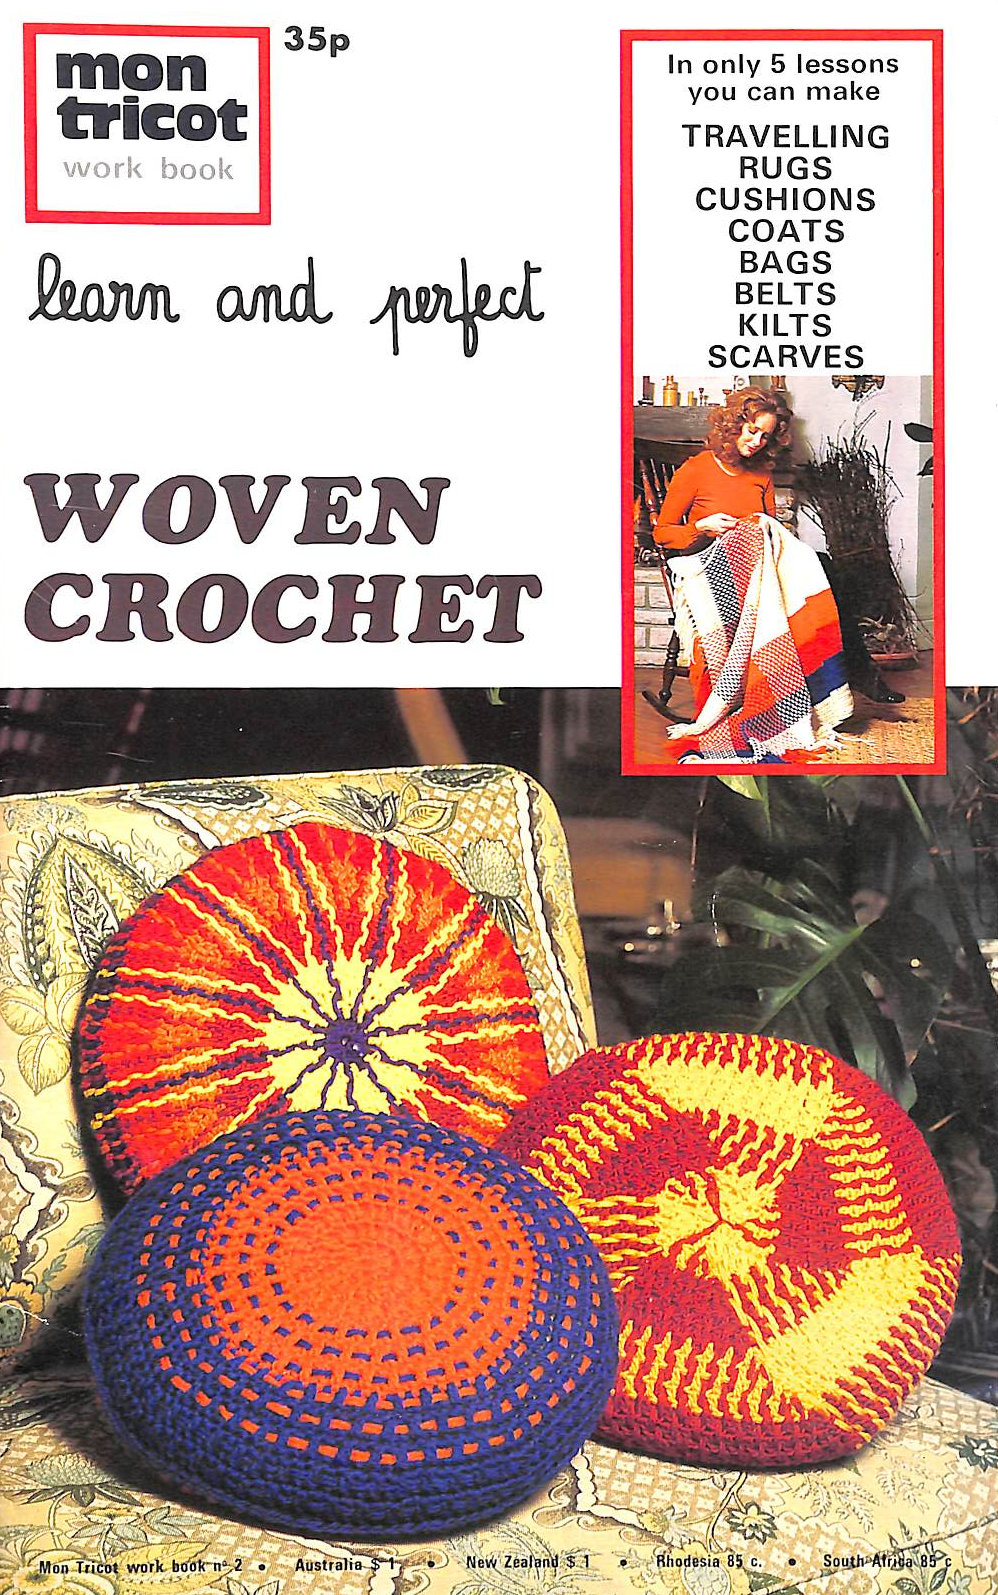 VARIOUS - Mon Tricot Learn and Perfect Woven Crochet, Work Book No. 2